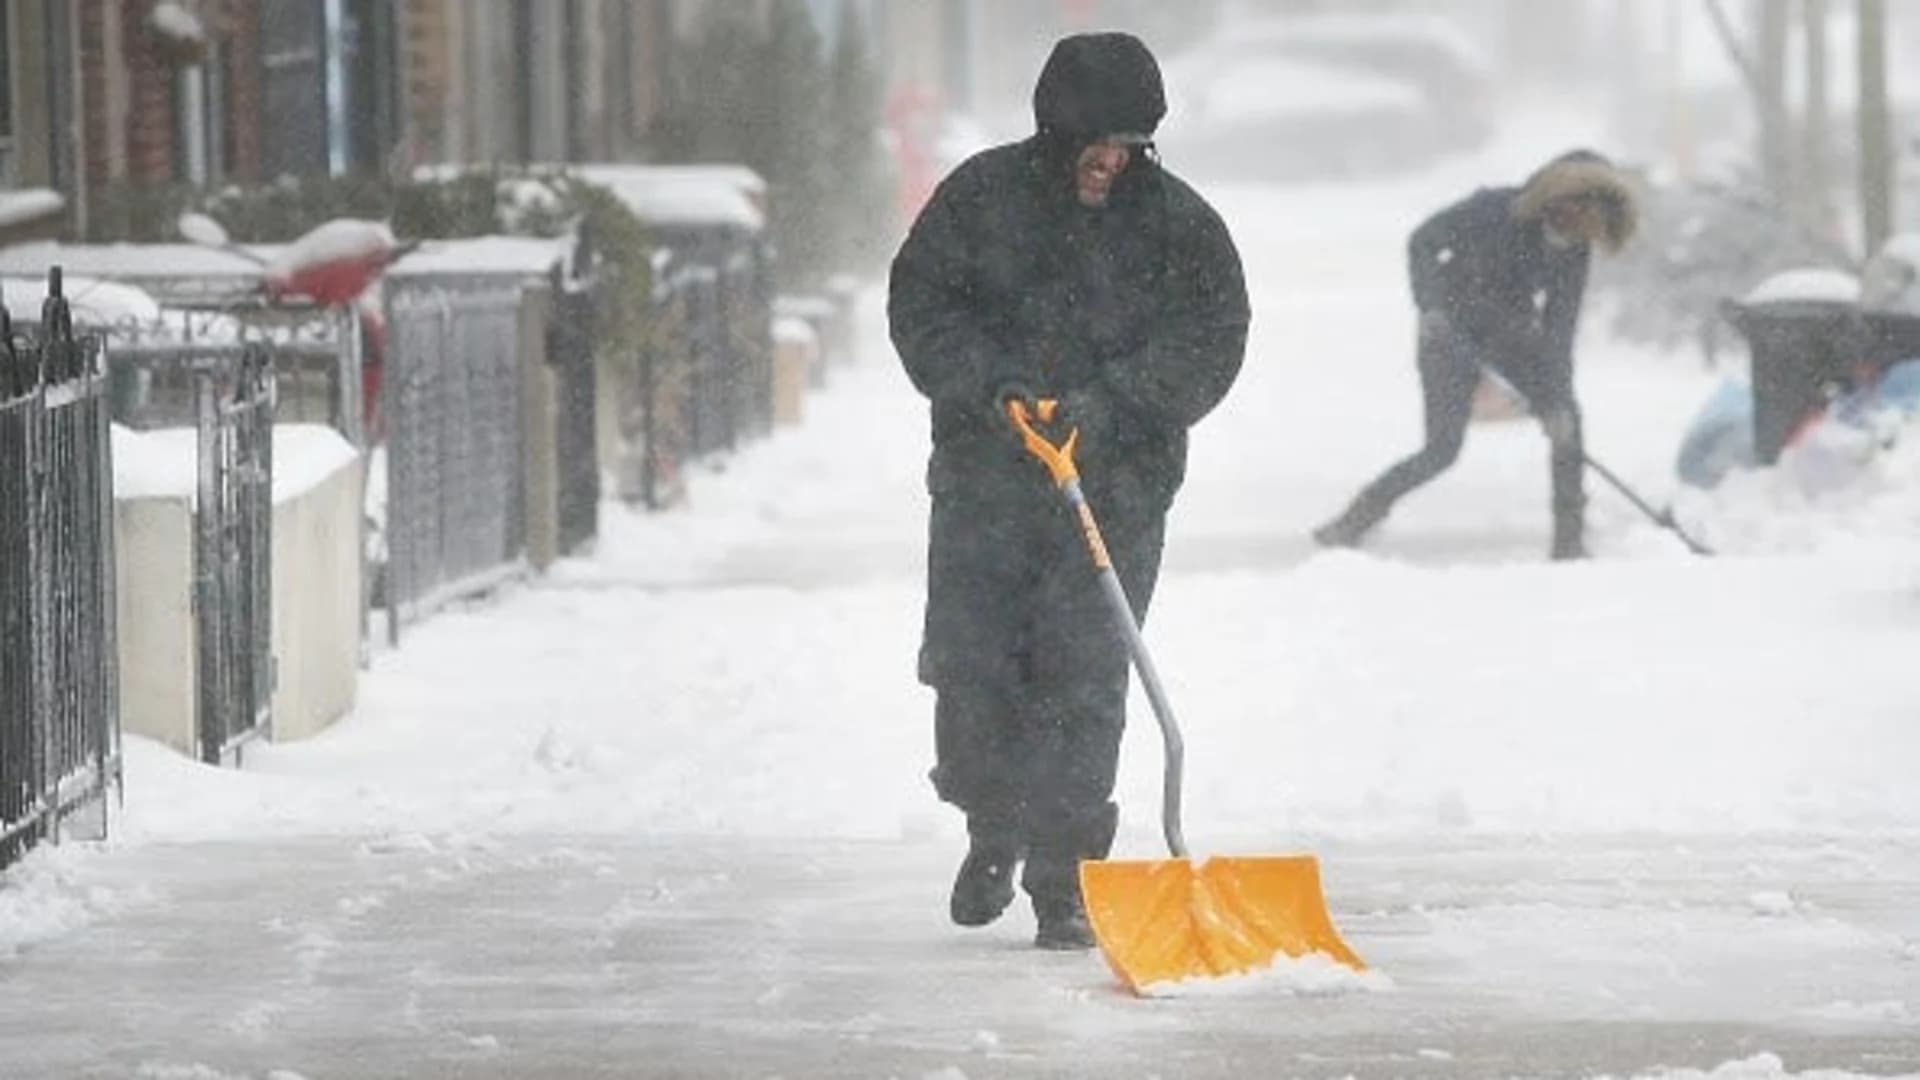 Nor'easter will bring snow, wind and coldest temperatures yet